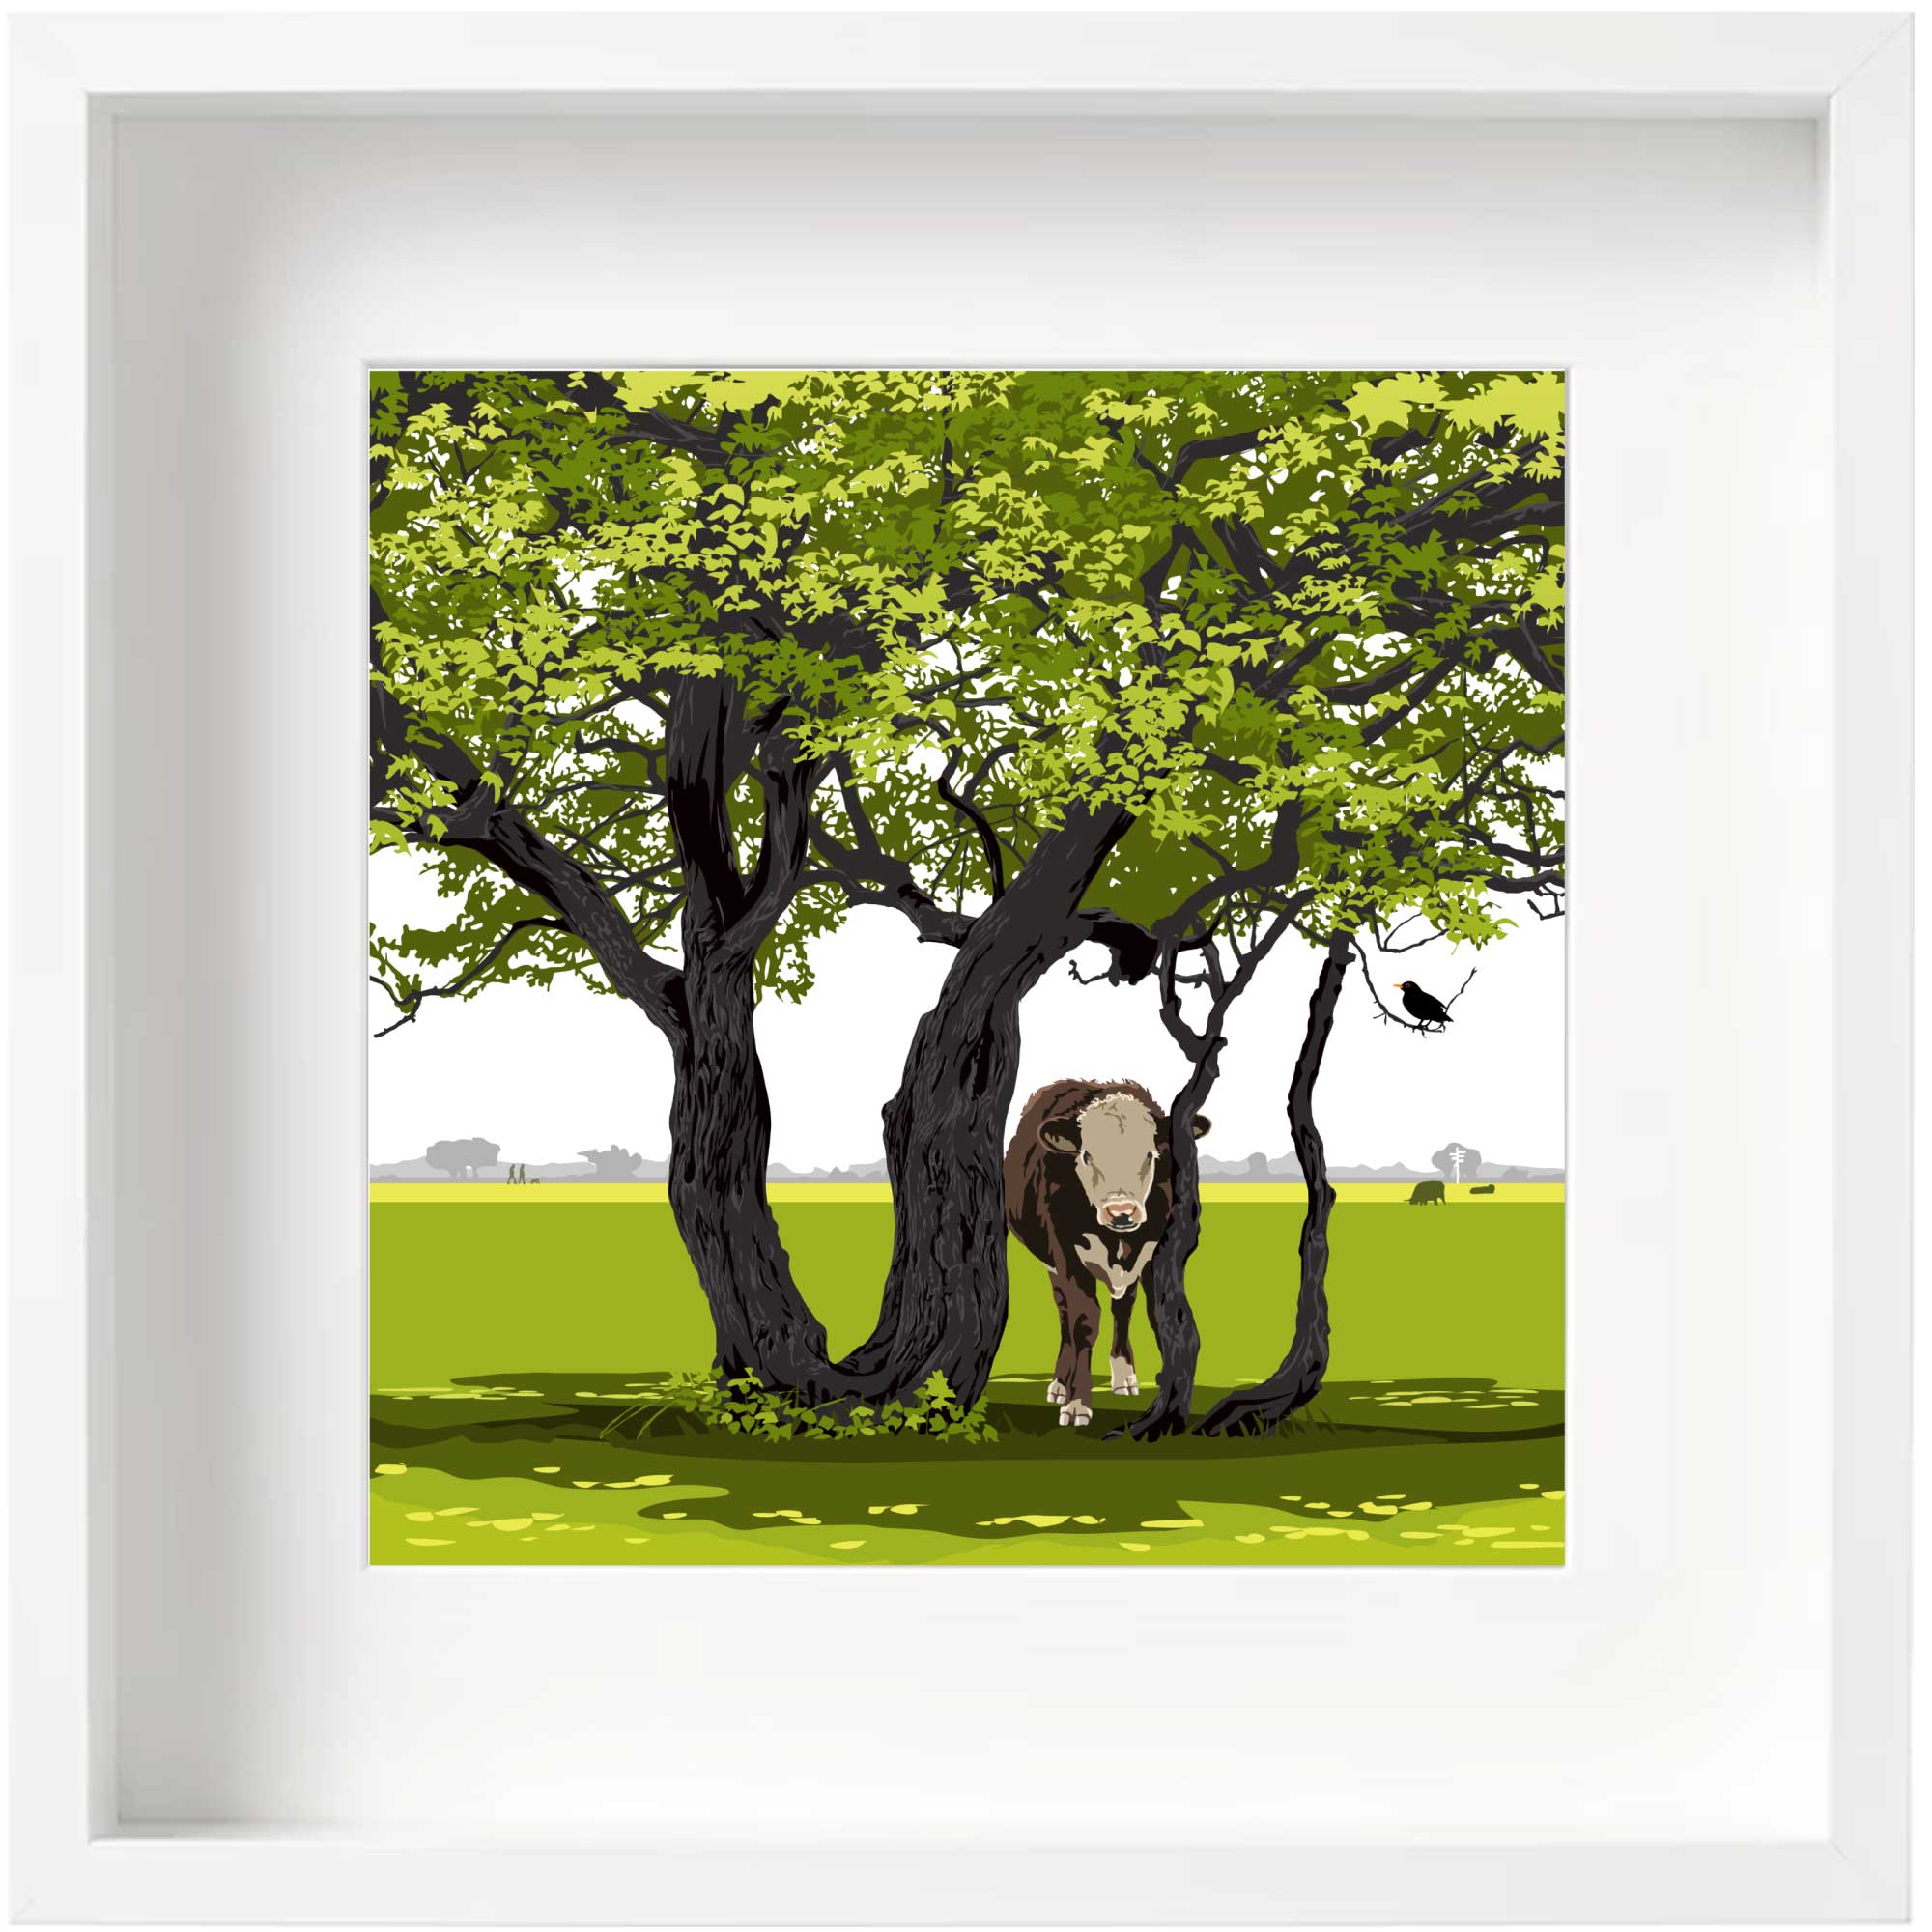 Shady Cow - Spring Green - Kent and Co Framed Art Print by Nichola Kent